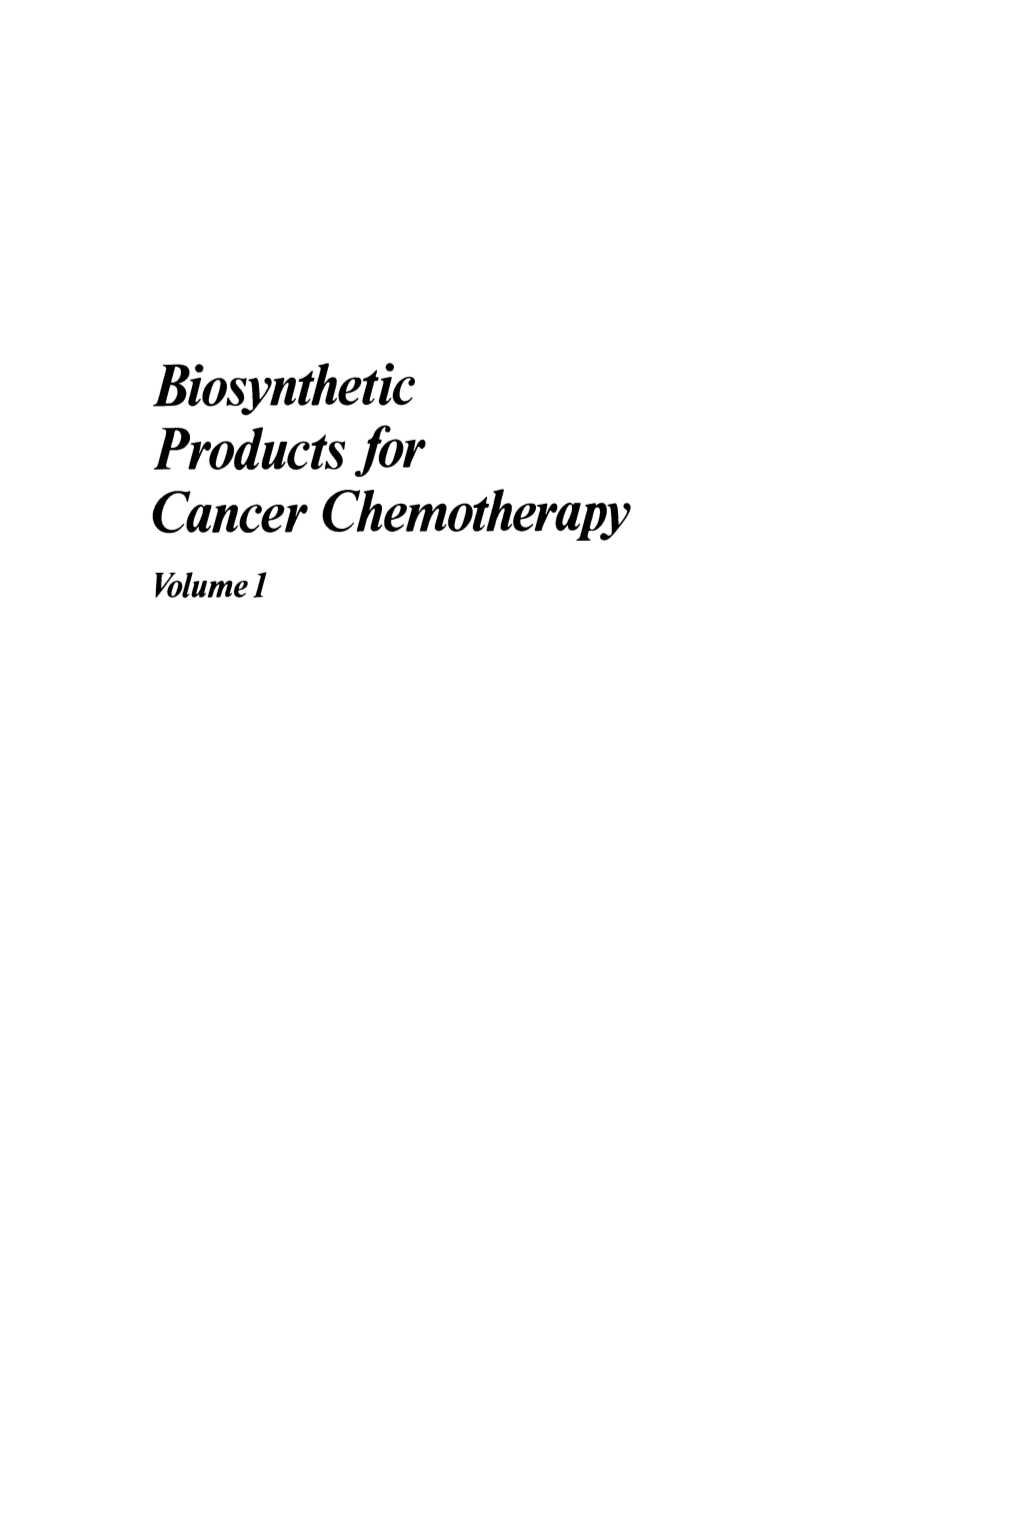 Biosynthetic Products for Cancer Chemotherapy Volume} Biosynthetic Products for Cancer Chemotherapy Volume}